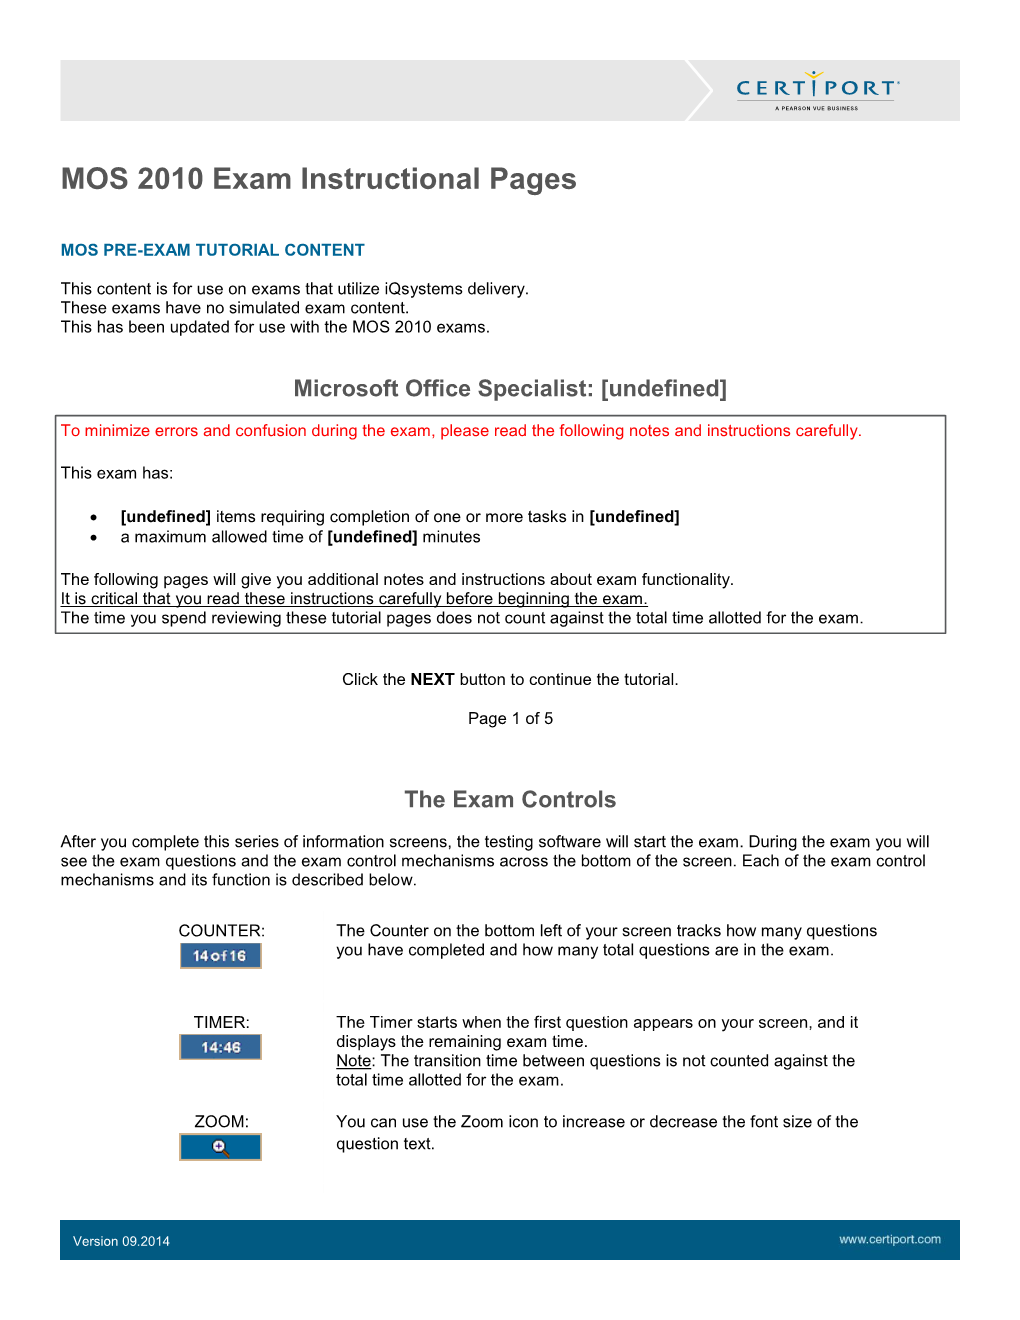 MOS 2010 Exam Instructional Pages